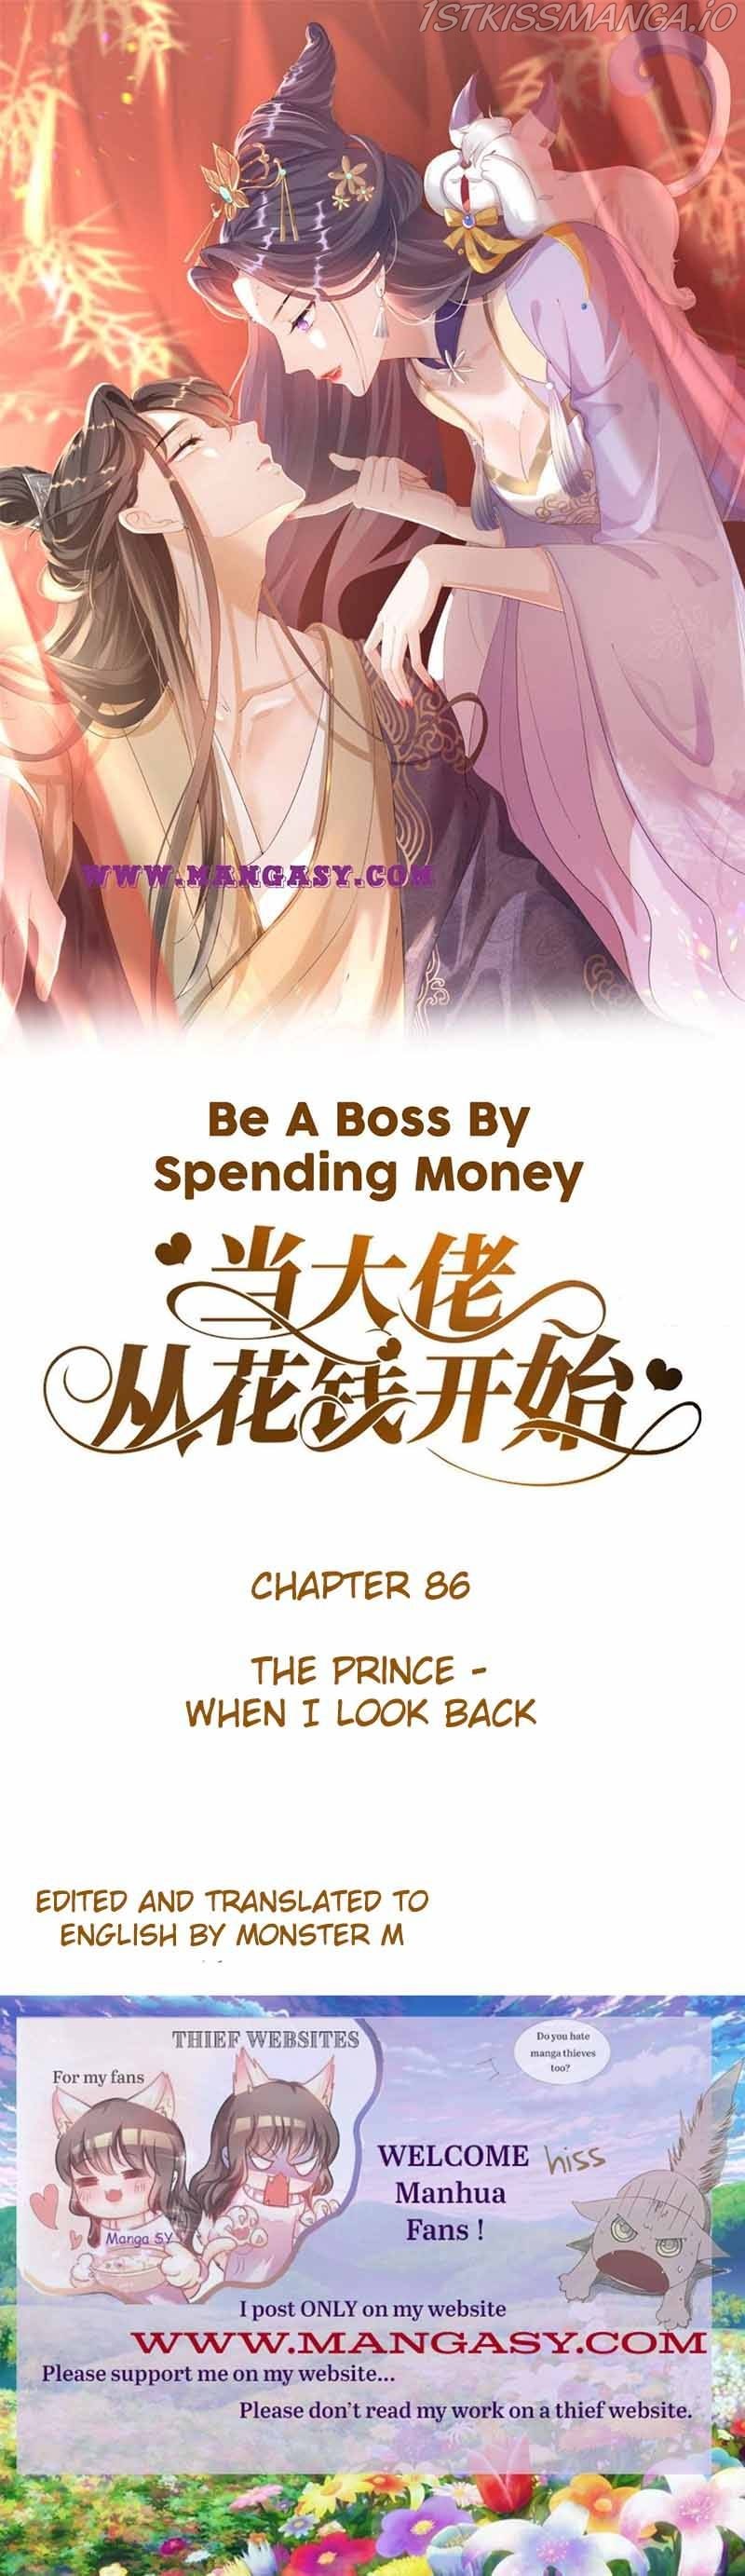 Becoming a Big Boss Starts with Spending Money chapter 86